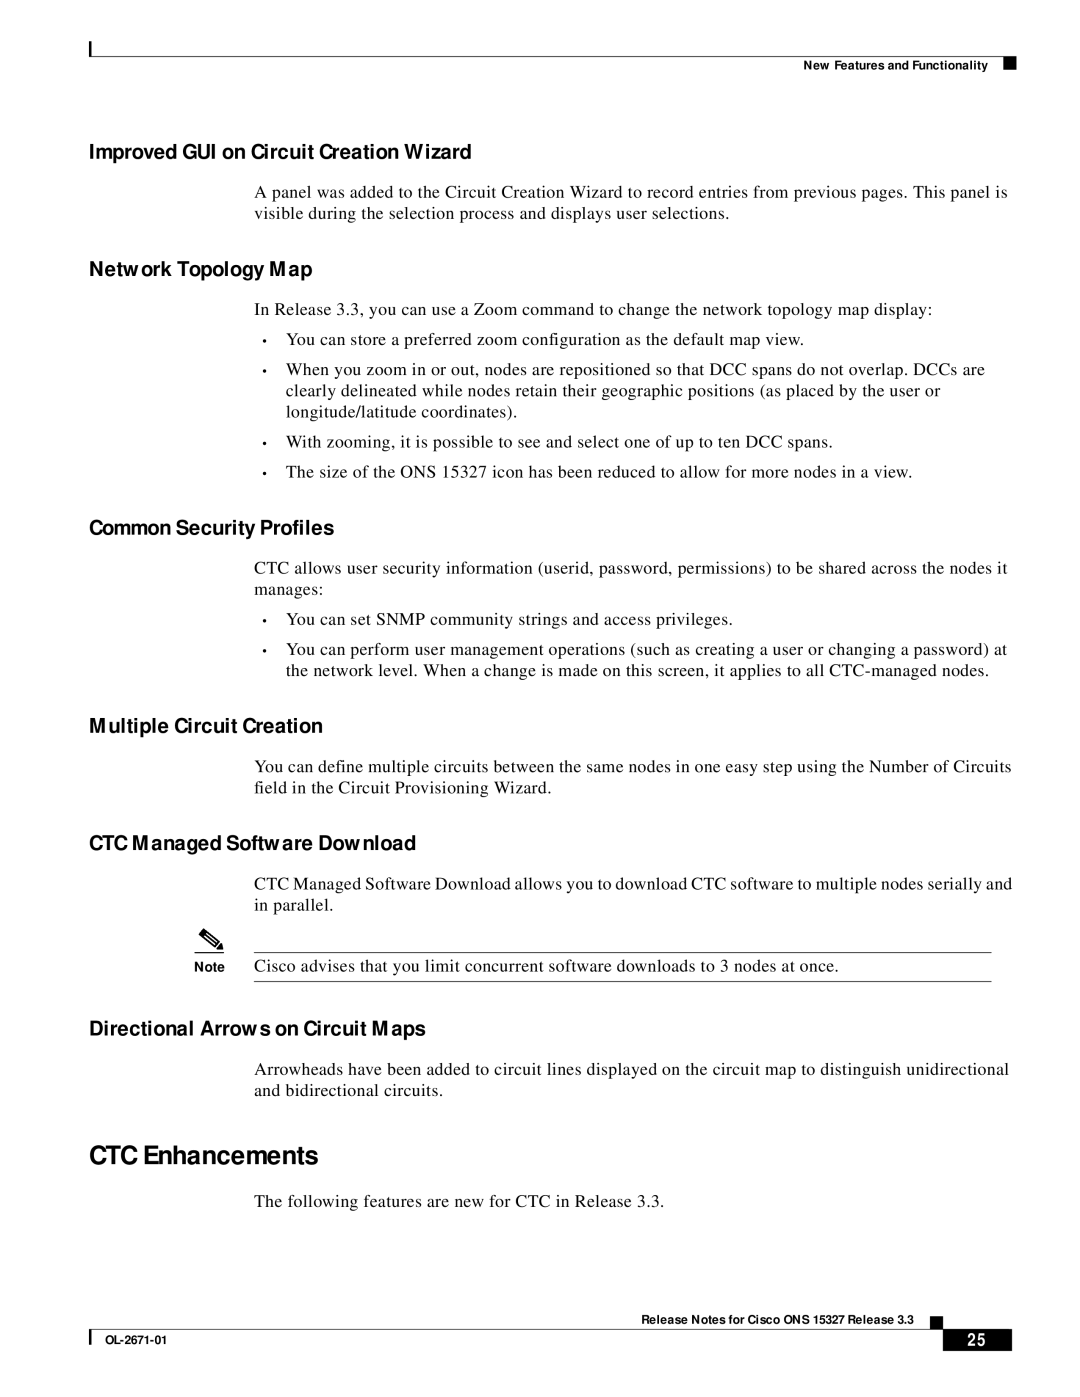 Cisco Systems ONS 15327 manual CTC Enhancements, Improved GUI on Circuit Creation Wizard, Network Topology Map 